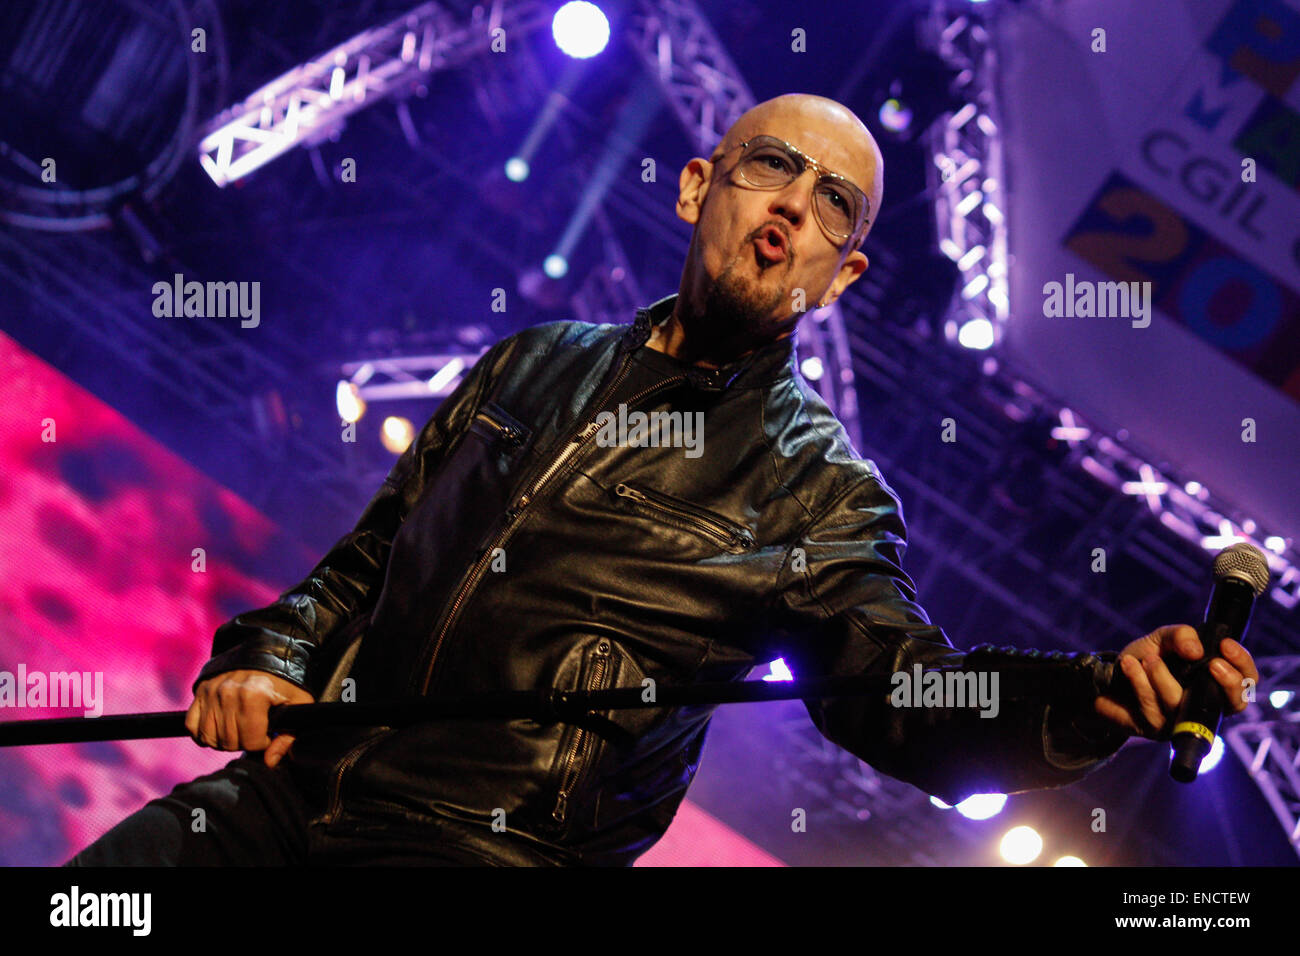 Enrico Ruggeri performed live at the annual May Day Concert, held from the three main Italian trade unions: CGIL, CISL and UIL at Piazza S. Giovanni in Rome. This is the 25th edition of the May Day Concert. (photo by Elena Aquila/Pacific Press) Stock Photo